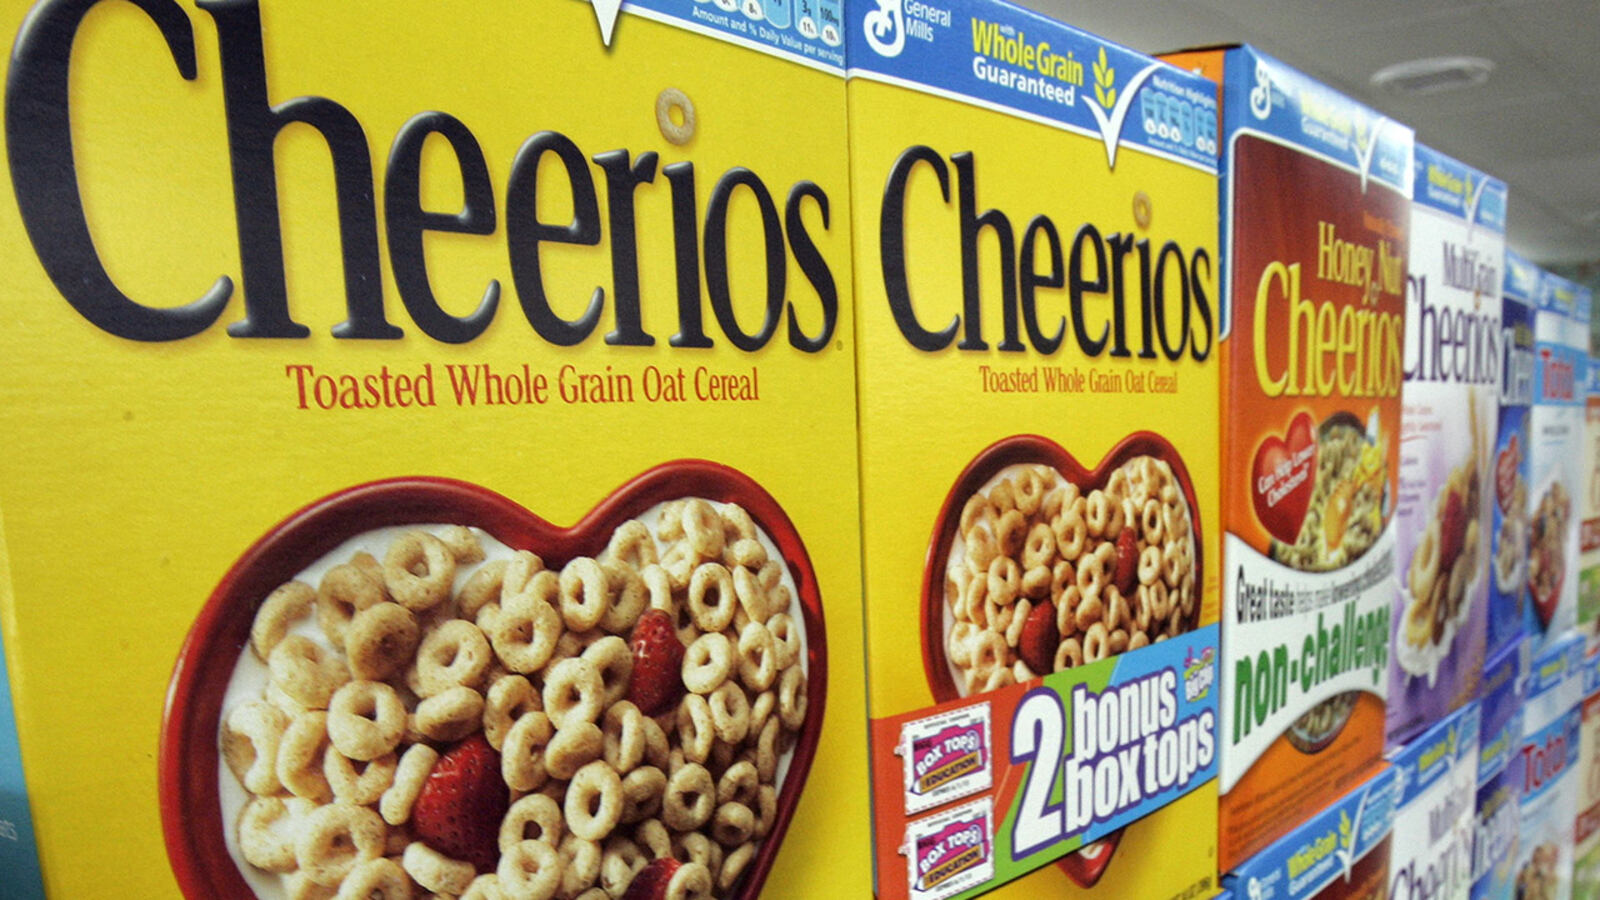 Class-Action Lawsuit Alleges General Mills’ Cheerios Contains Harmful Levels Of Pesticide